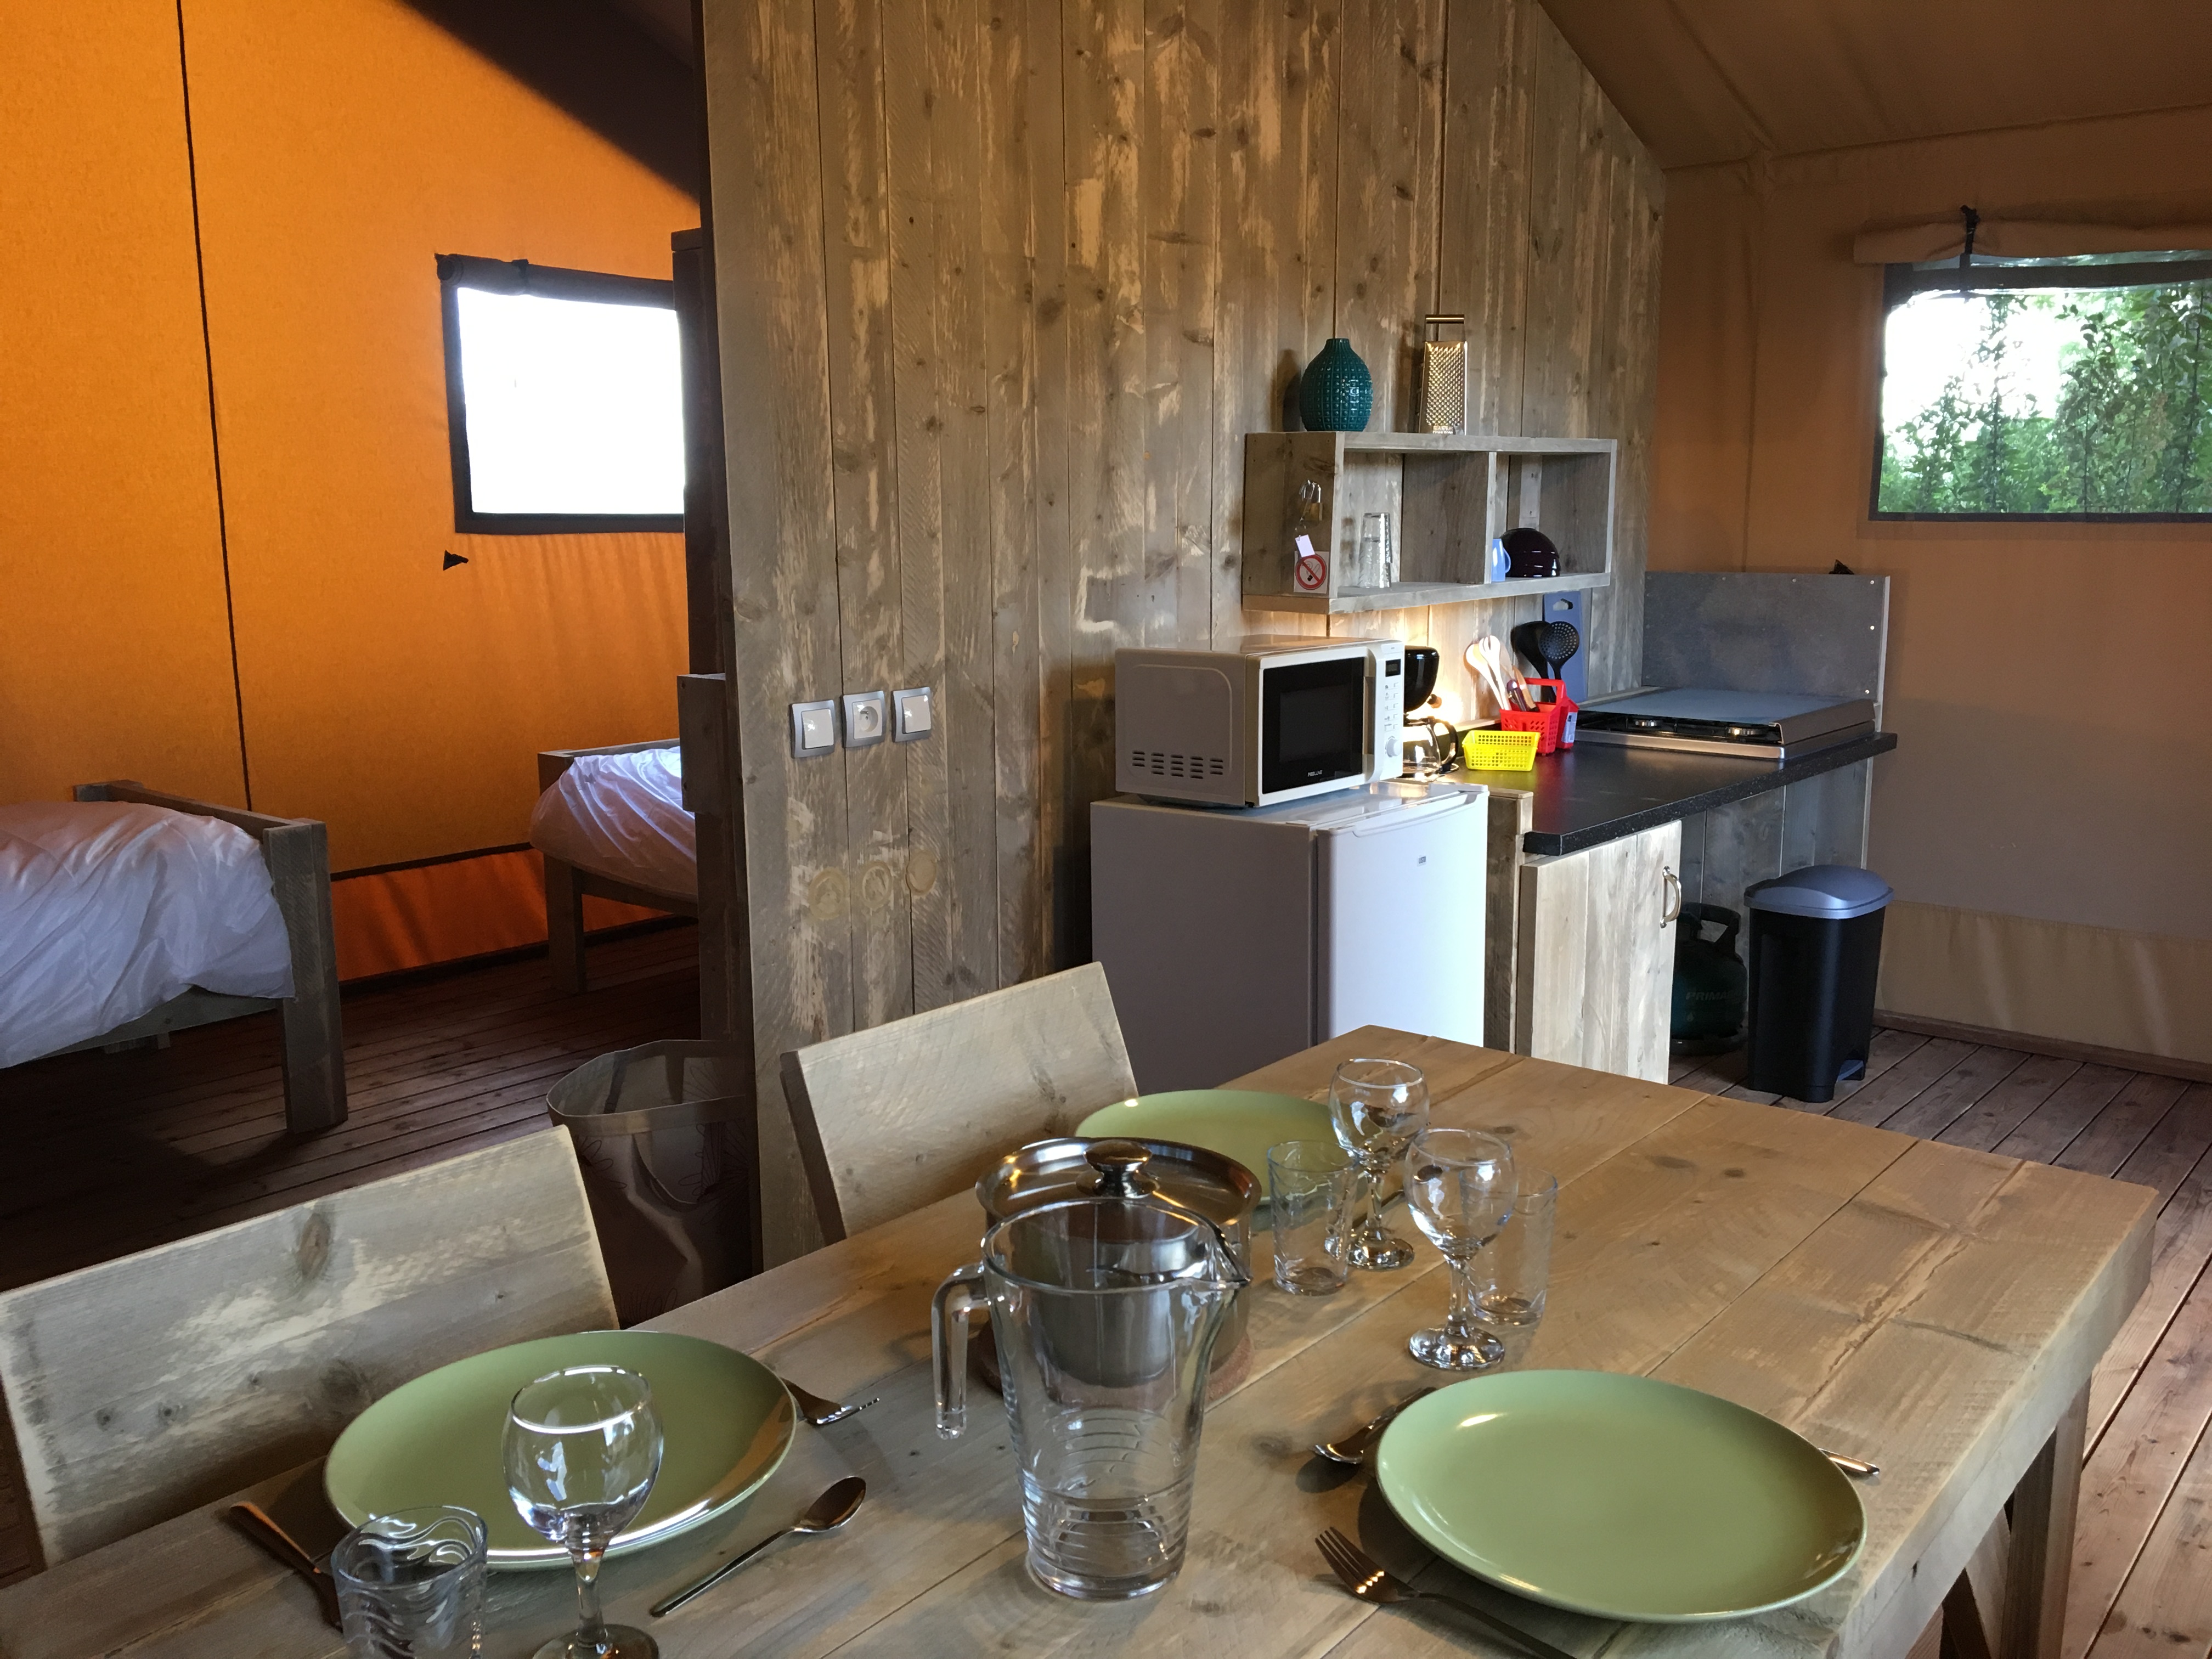 Location - Lodge Pmr Accès Sanitaires Communs 3 Pers. - Glamping Sainte-Suzanne